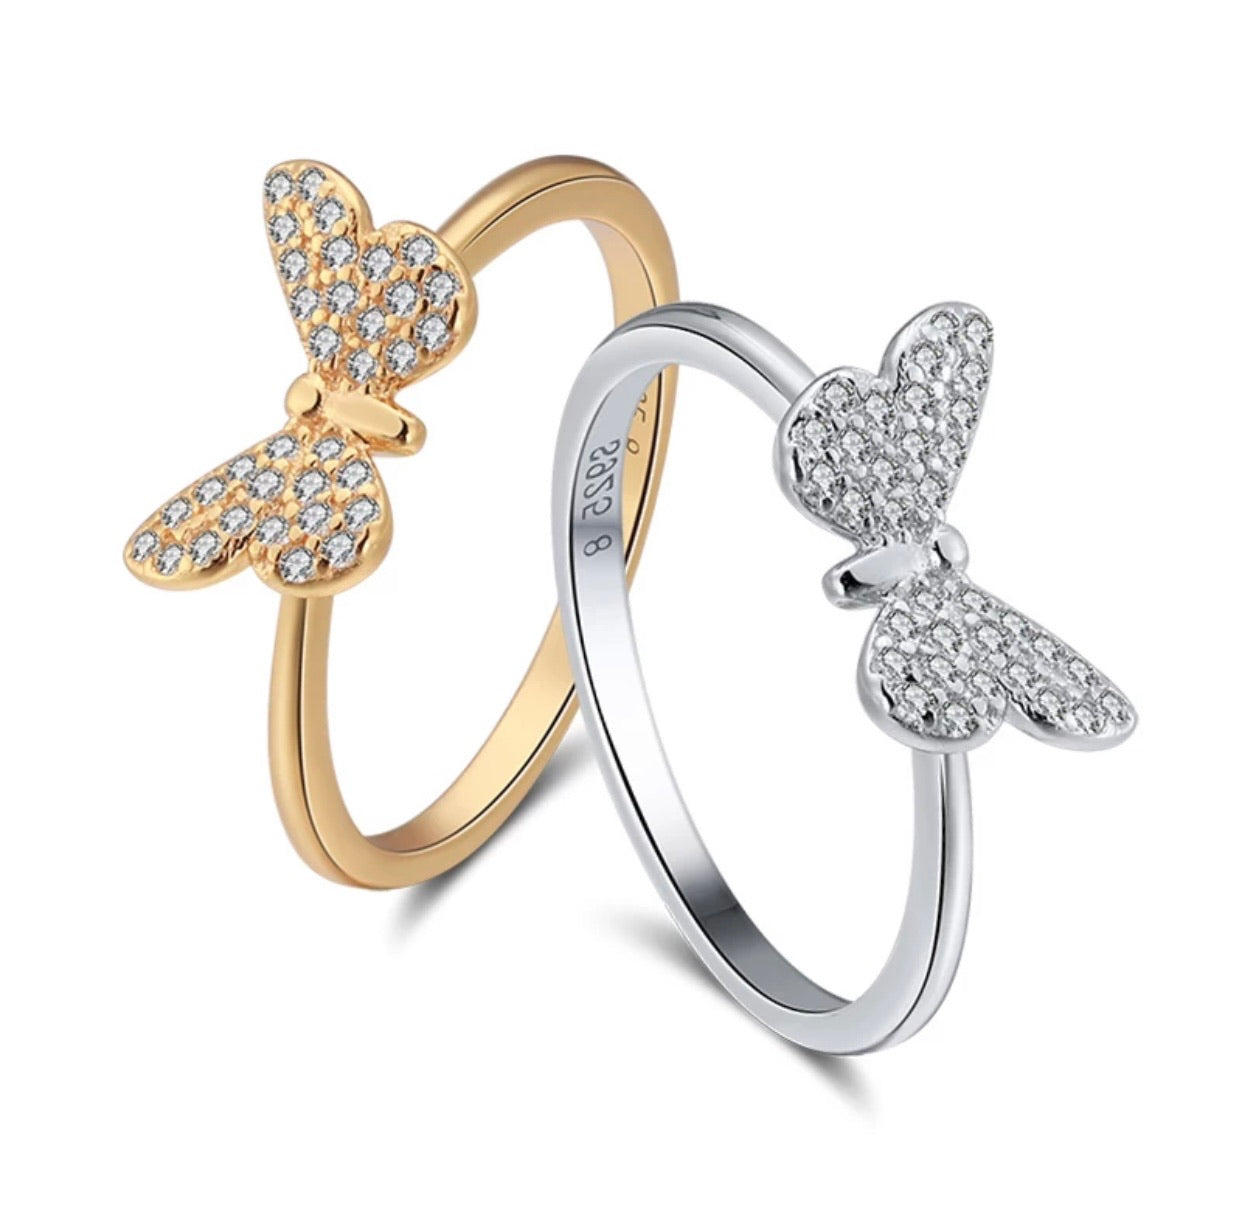 "Fly high" butterfly ring